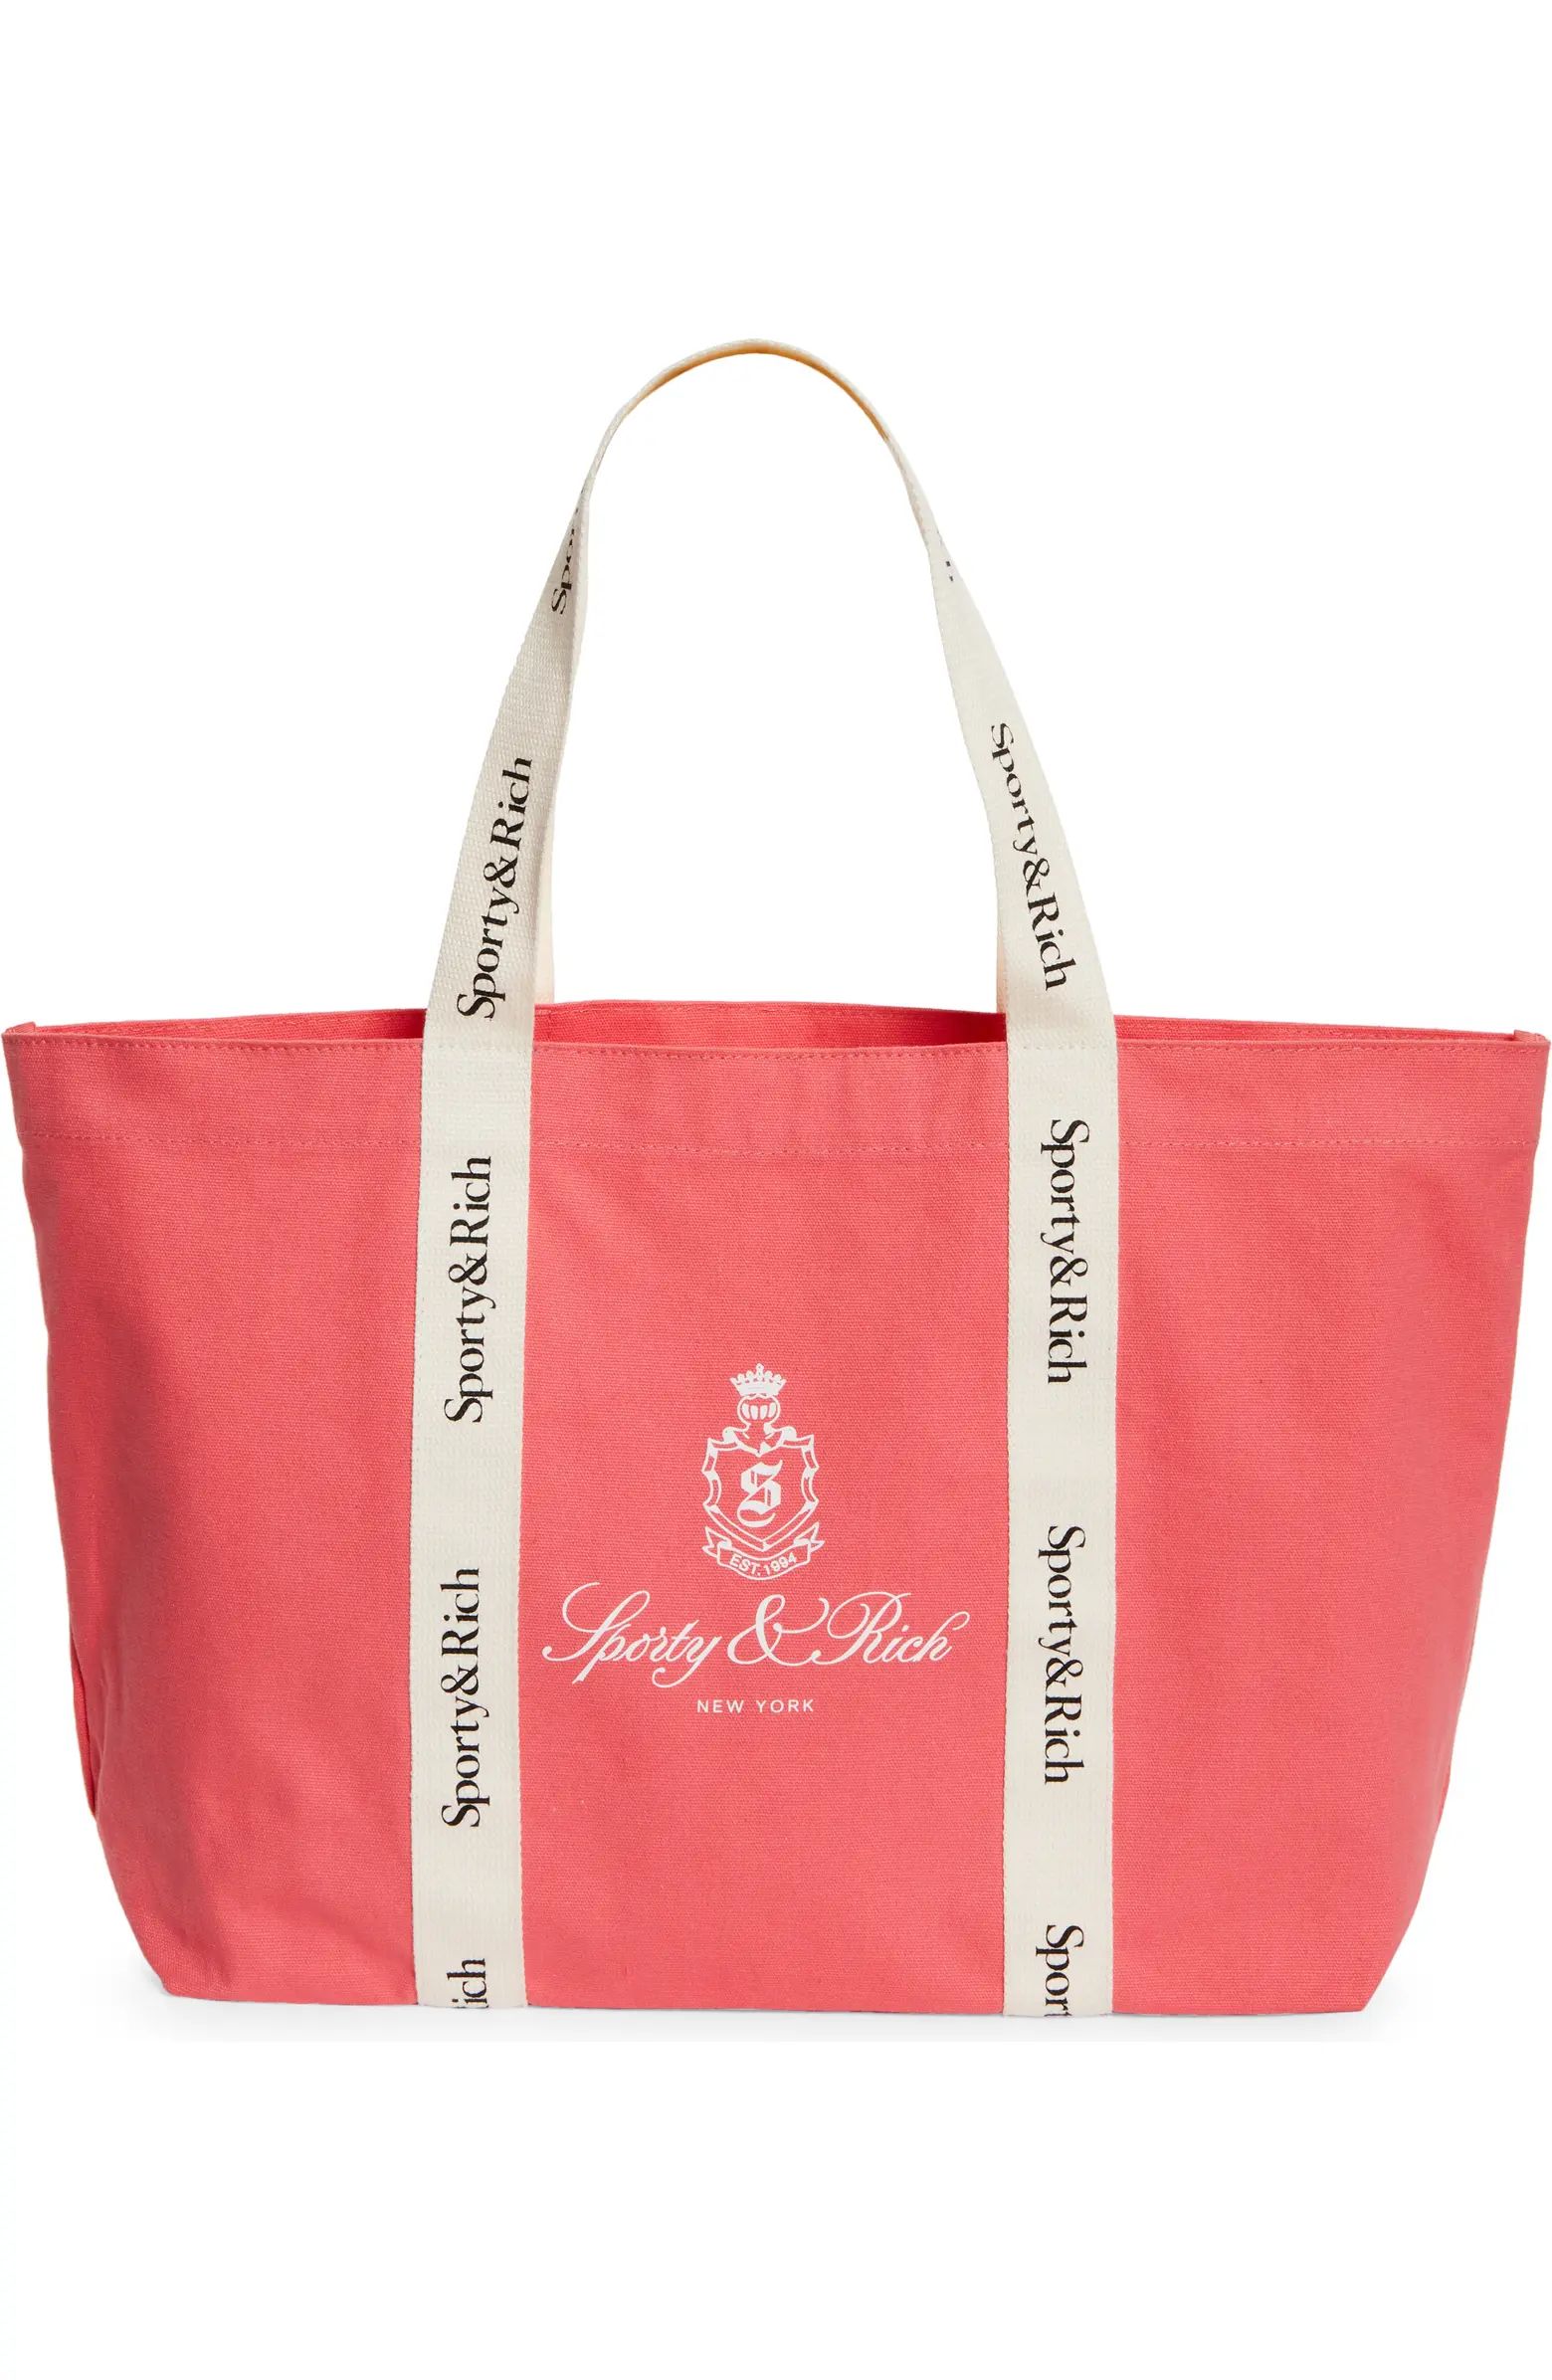 Sporty & Rich Vendome Club Embroidered Cotton Tote | Nordstrom | Nordstrom